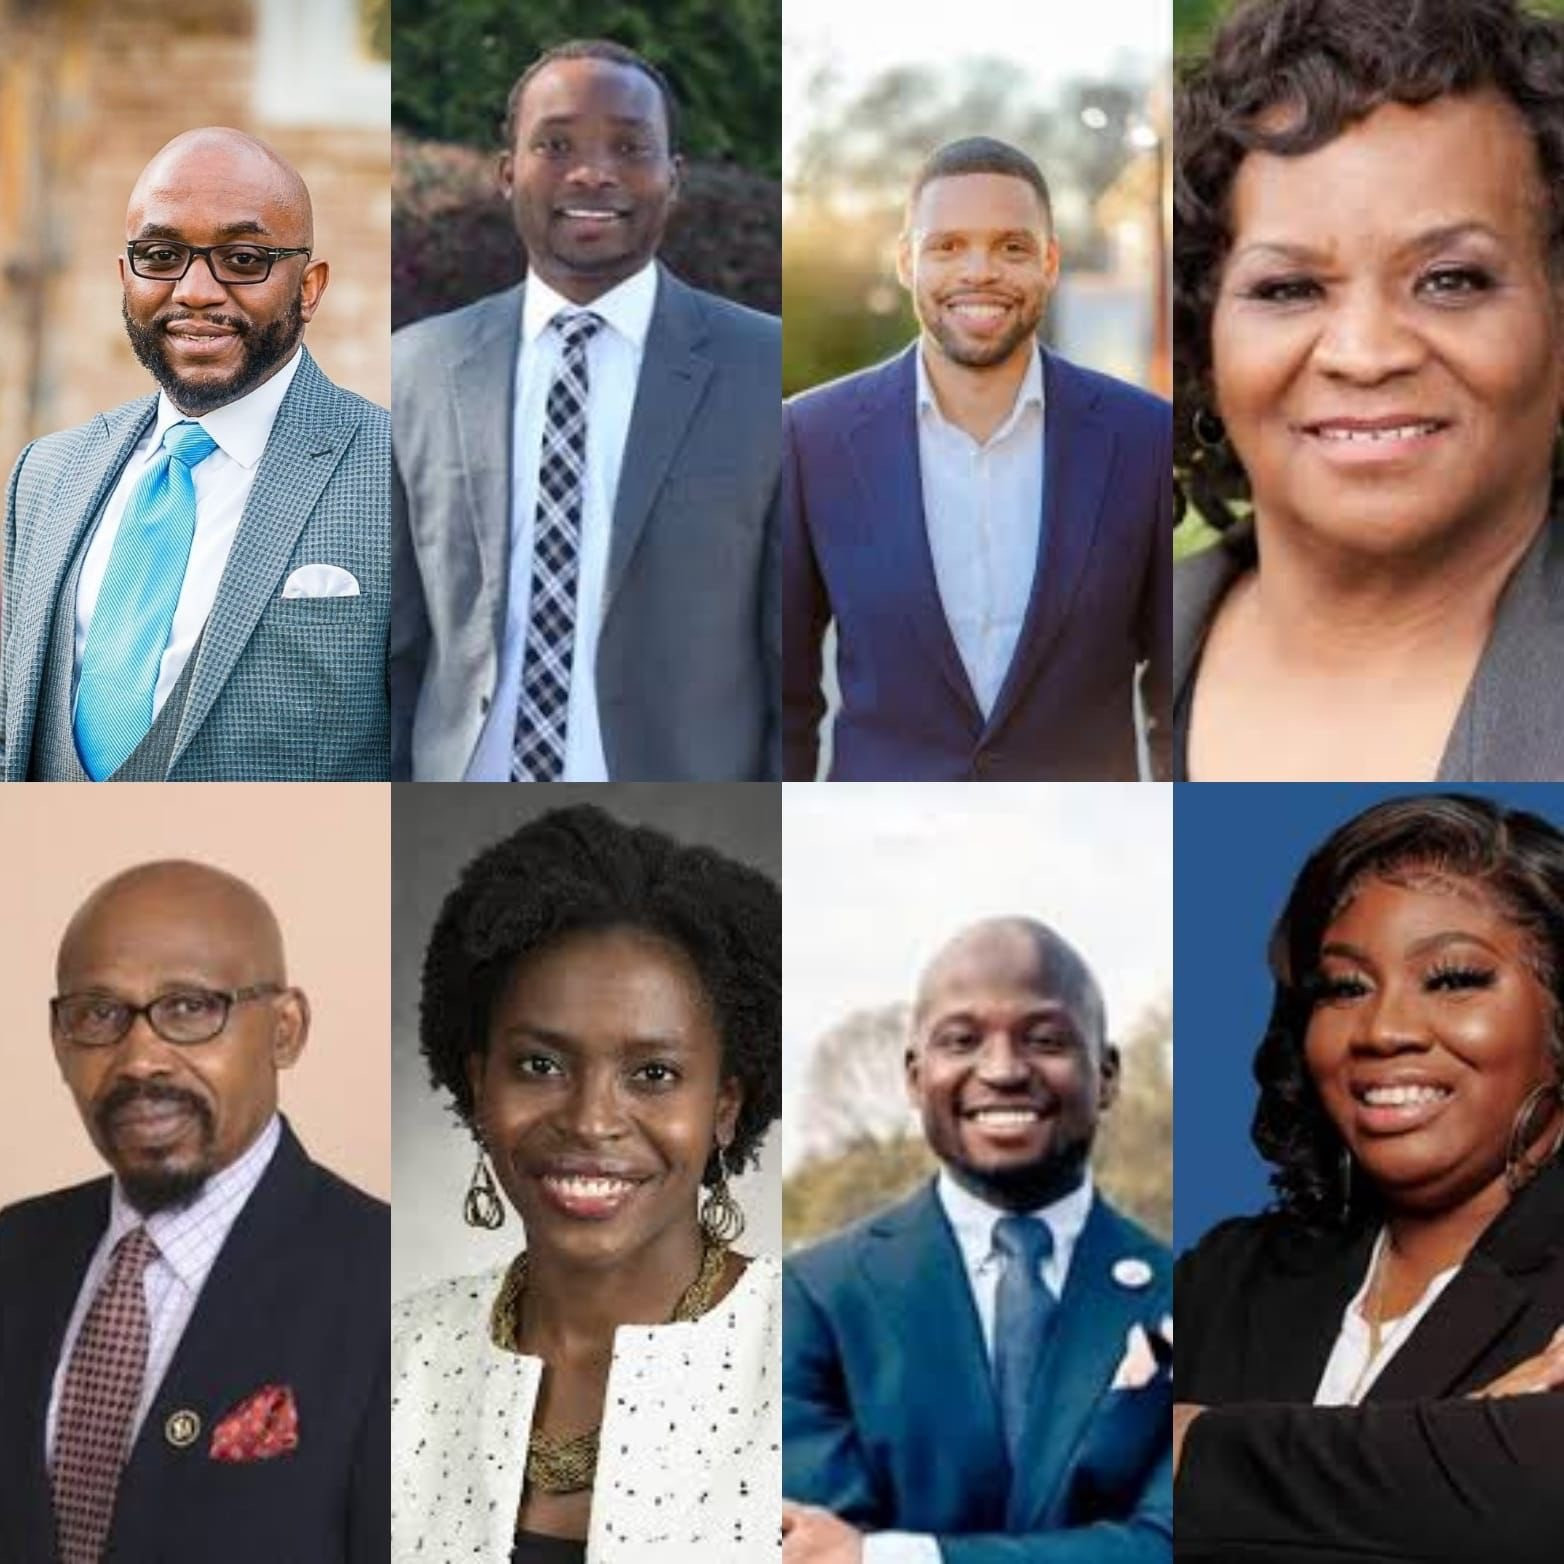 8 NIGERIAN-AMERICANS WIN BIG IN US MIDTERM ELECTIONS